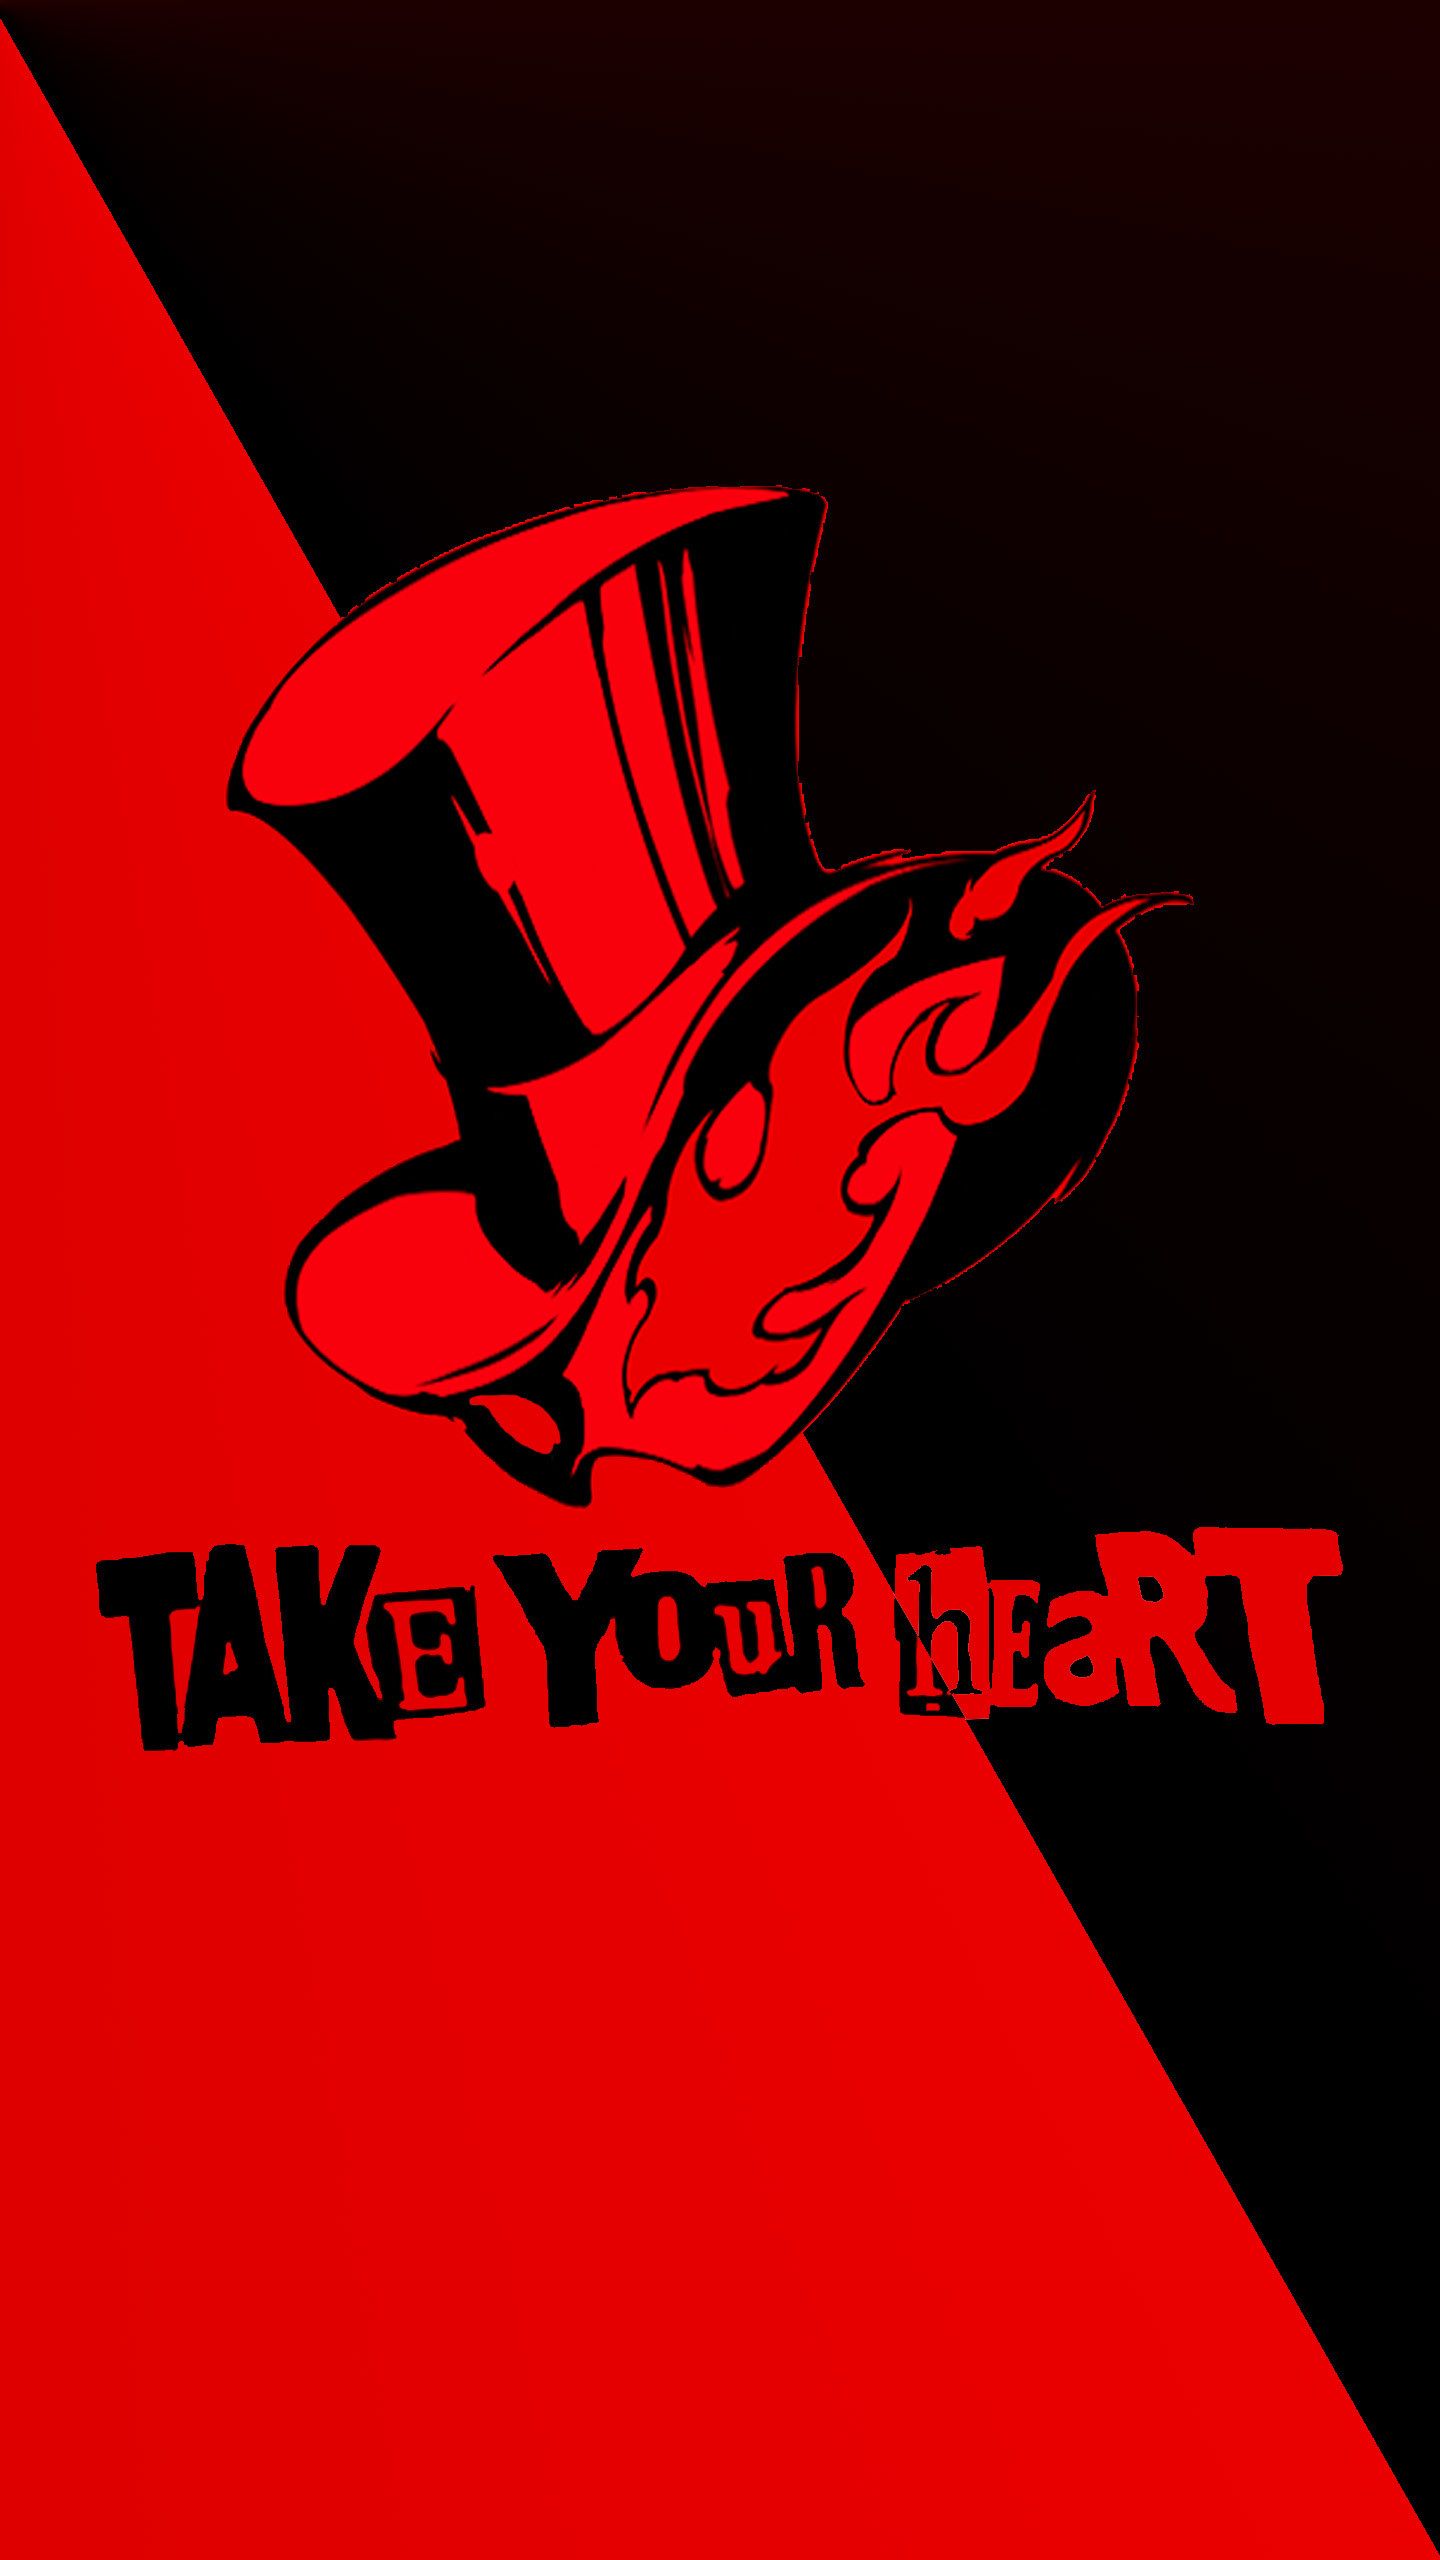 Persona 5 Mobile Wallpapers